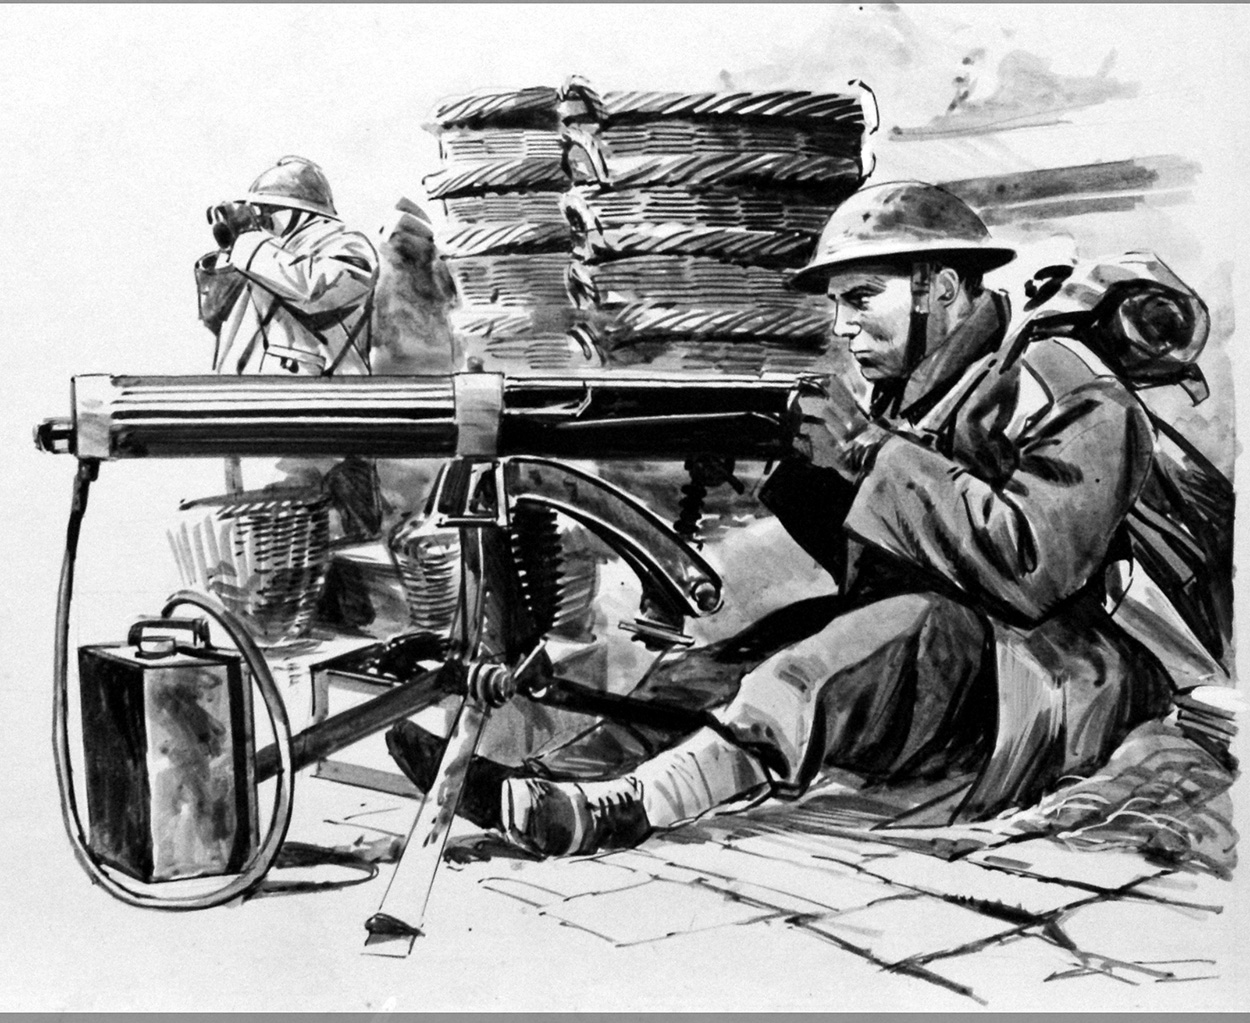 British Machine Gunner waiting for the Germans outside Dunkirk (Original) art by Land (Wilf Hardy) at The Illustration Art Gallery